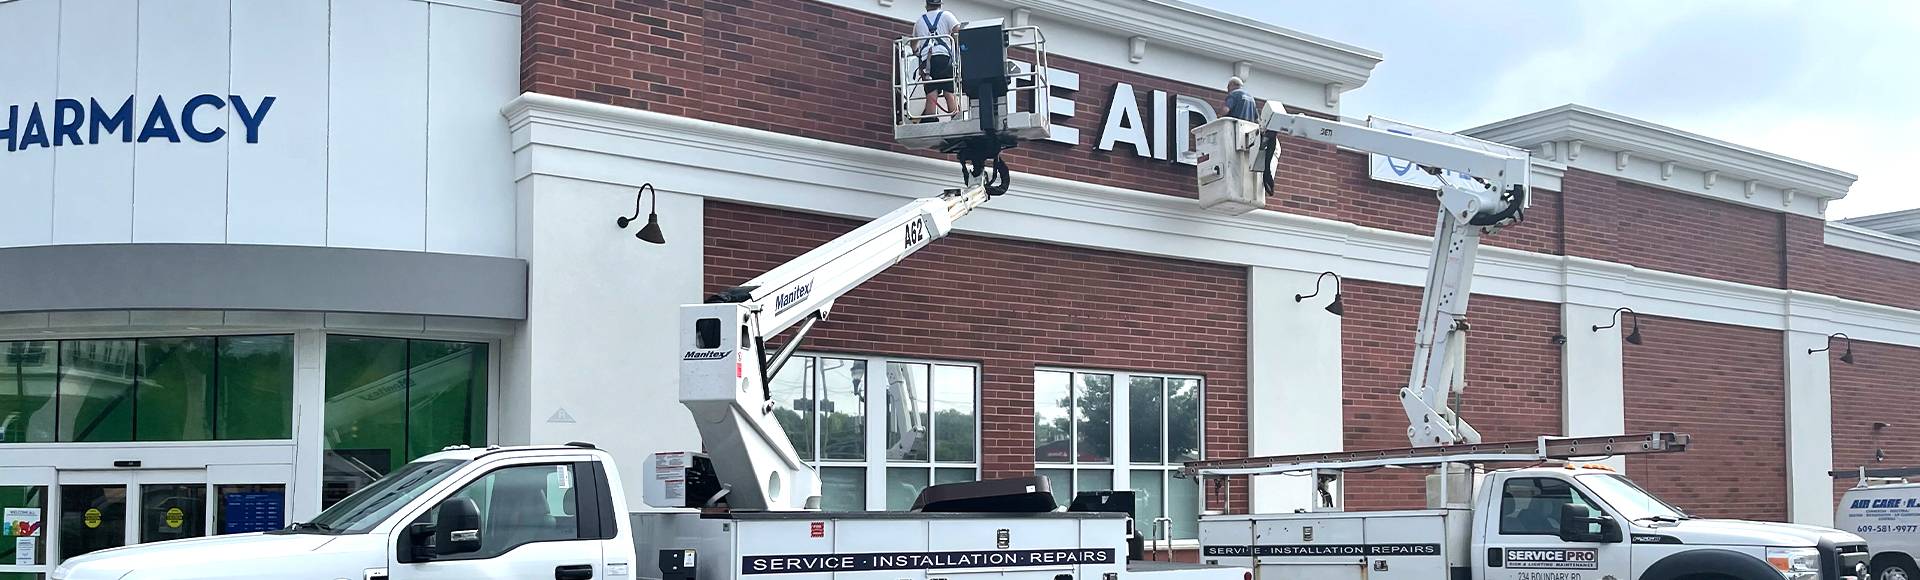 Commercial sign installation in NJ, Eastern PA and NYC